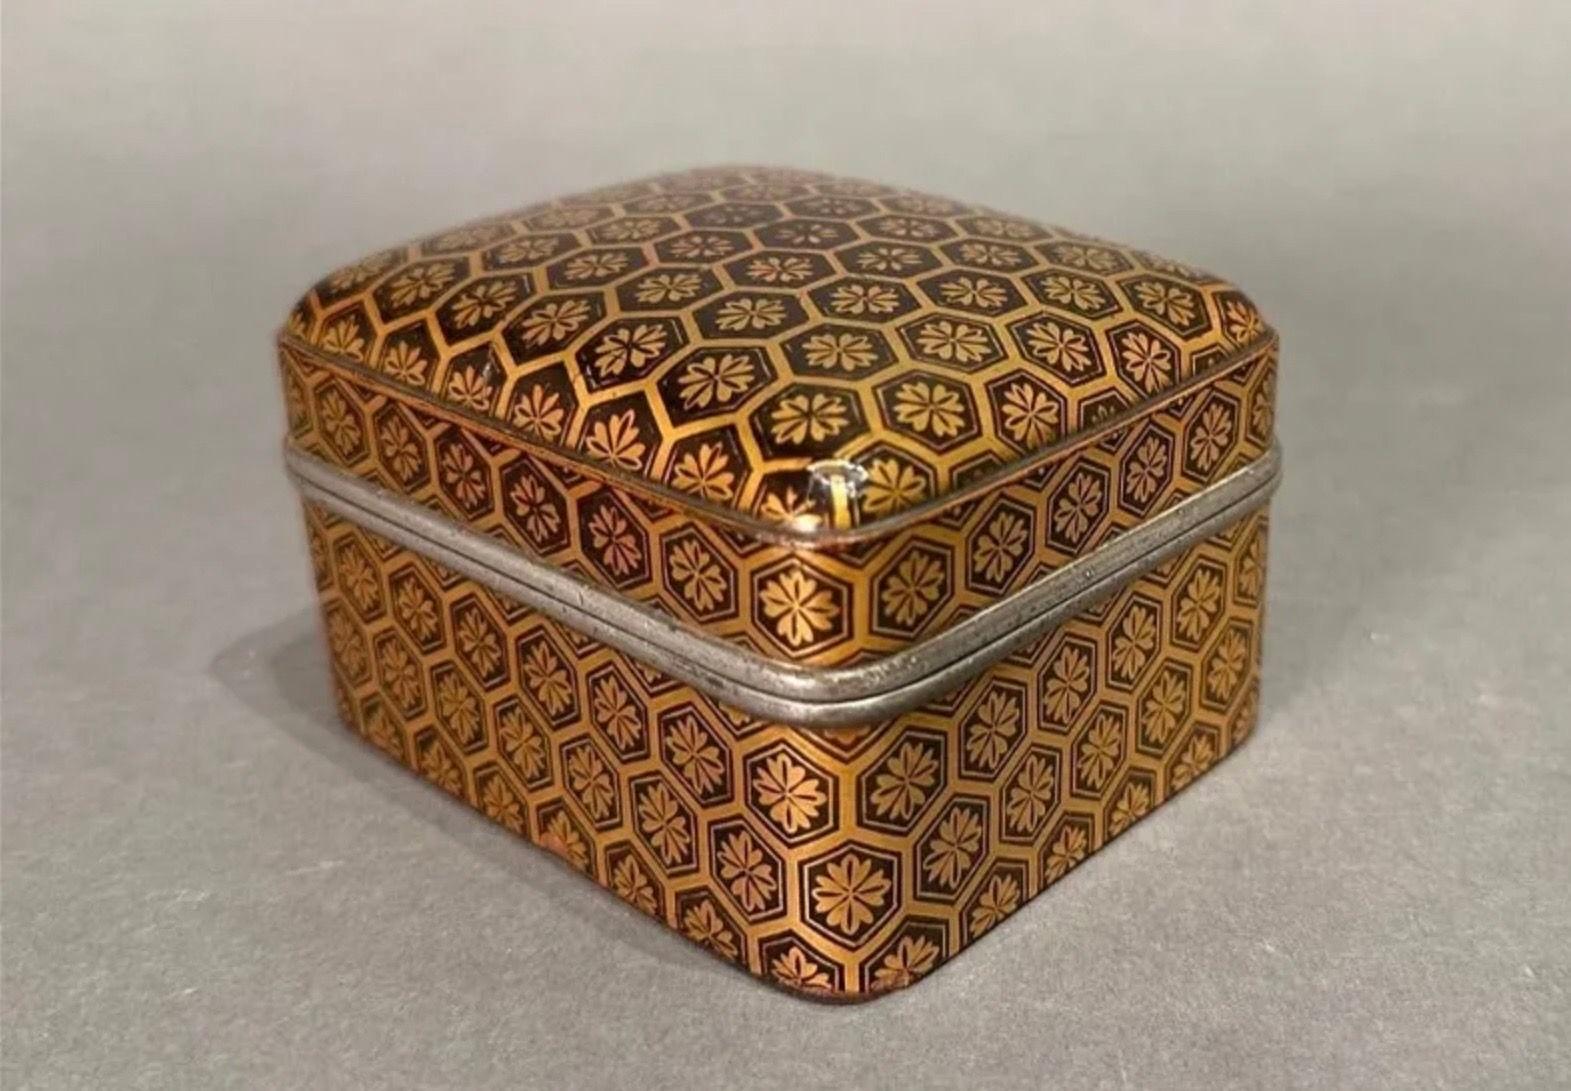 Early Japanese Lacquer Incense Box (Kogo) Late 17thc. Of rectangular form with soft corners, decorated with a diaper pattern in gold lacquer on a brownish black ground, with pewter rims.
Dimensions: 2.25 × 4 × 2.5 in.
Condition: Some age appropriate